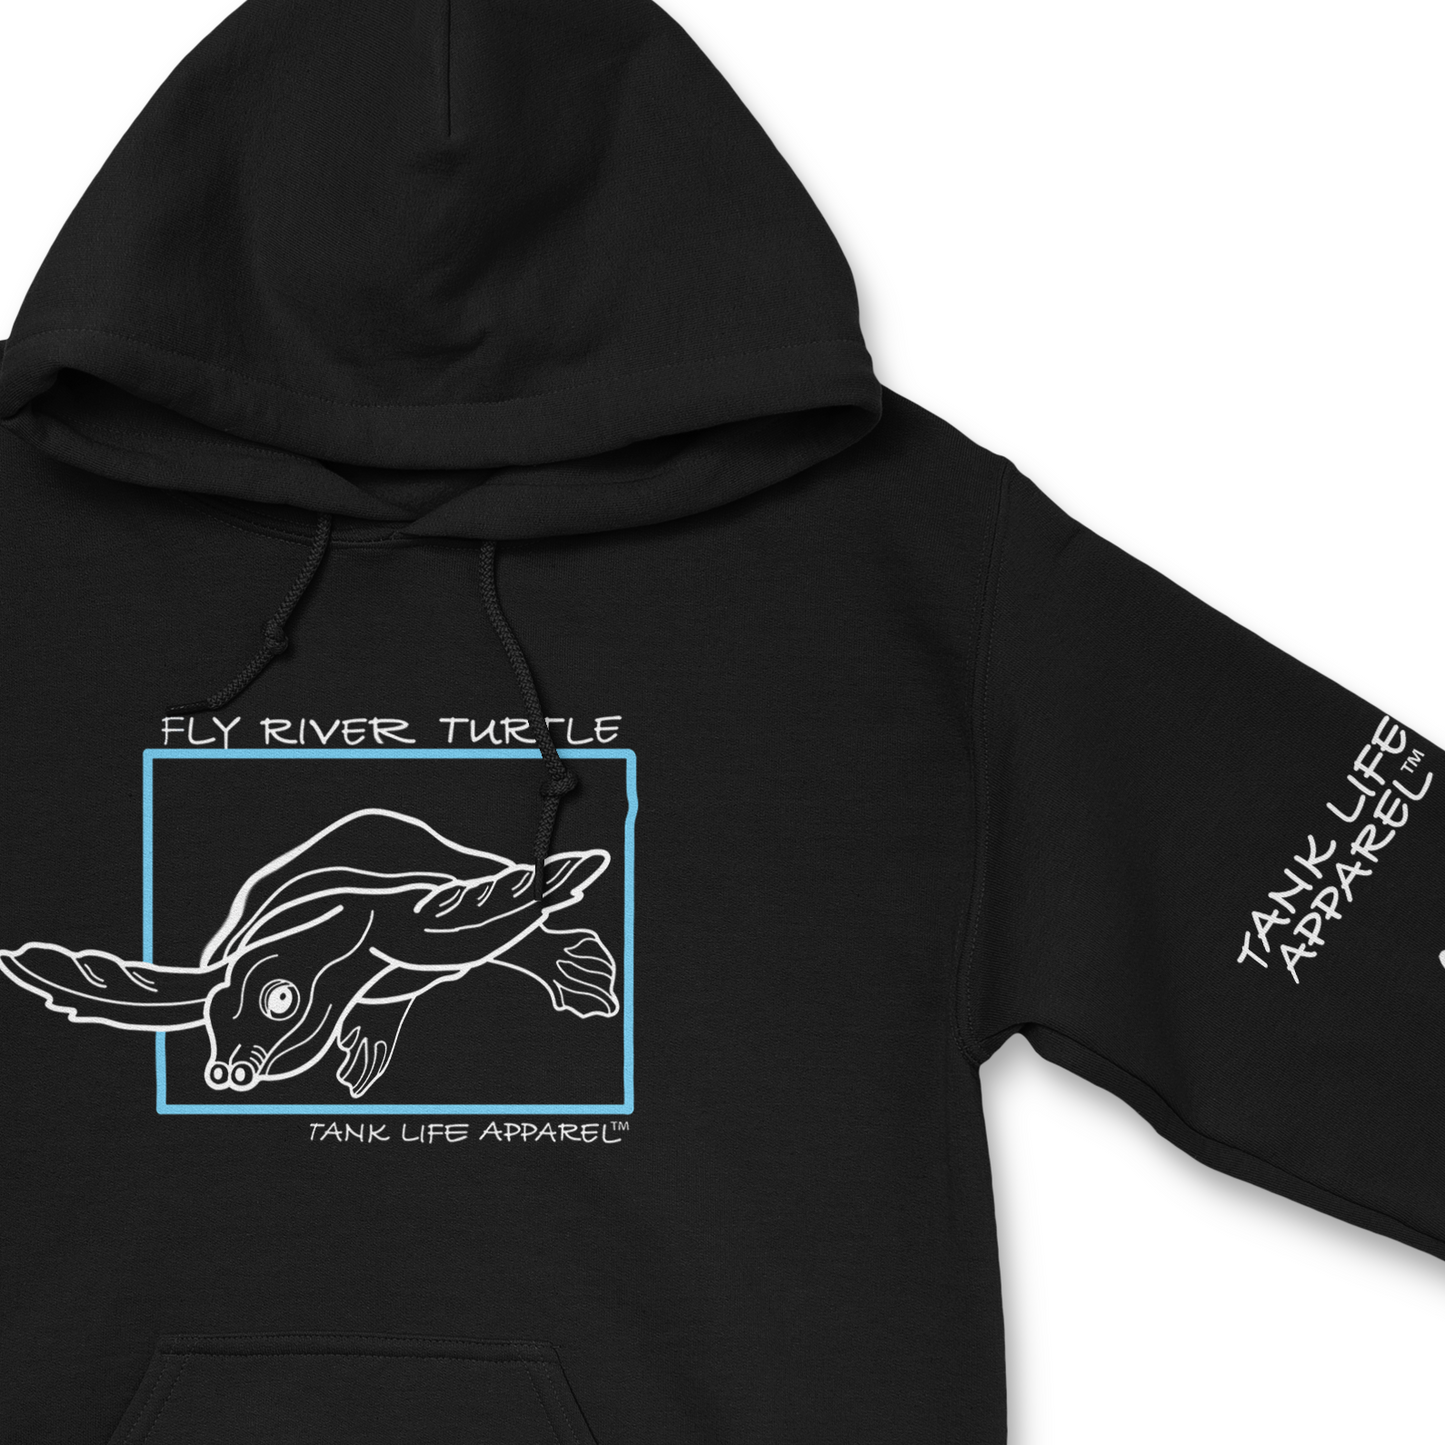 The Tank Life Apparel Fly River Turtle design on a super soft and comfortable hoodie. White aquatic turtle in light blue square.